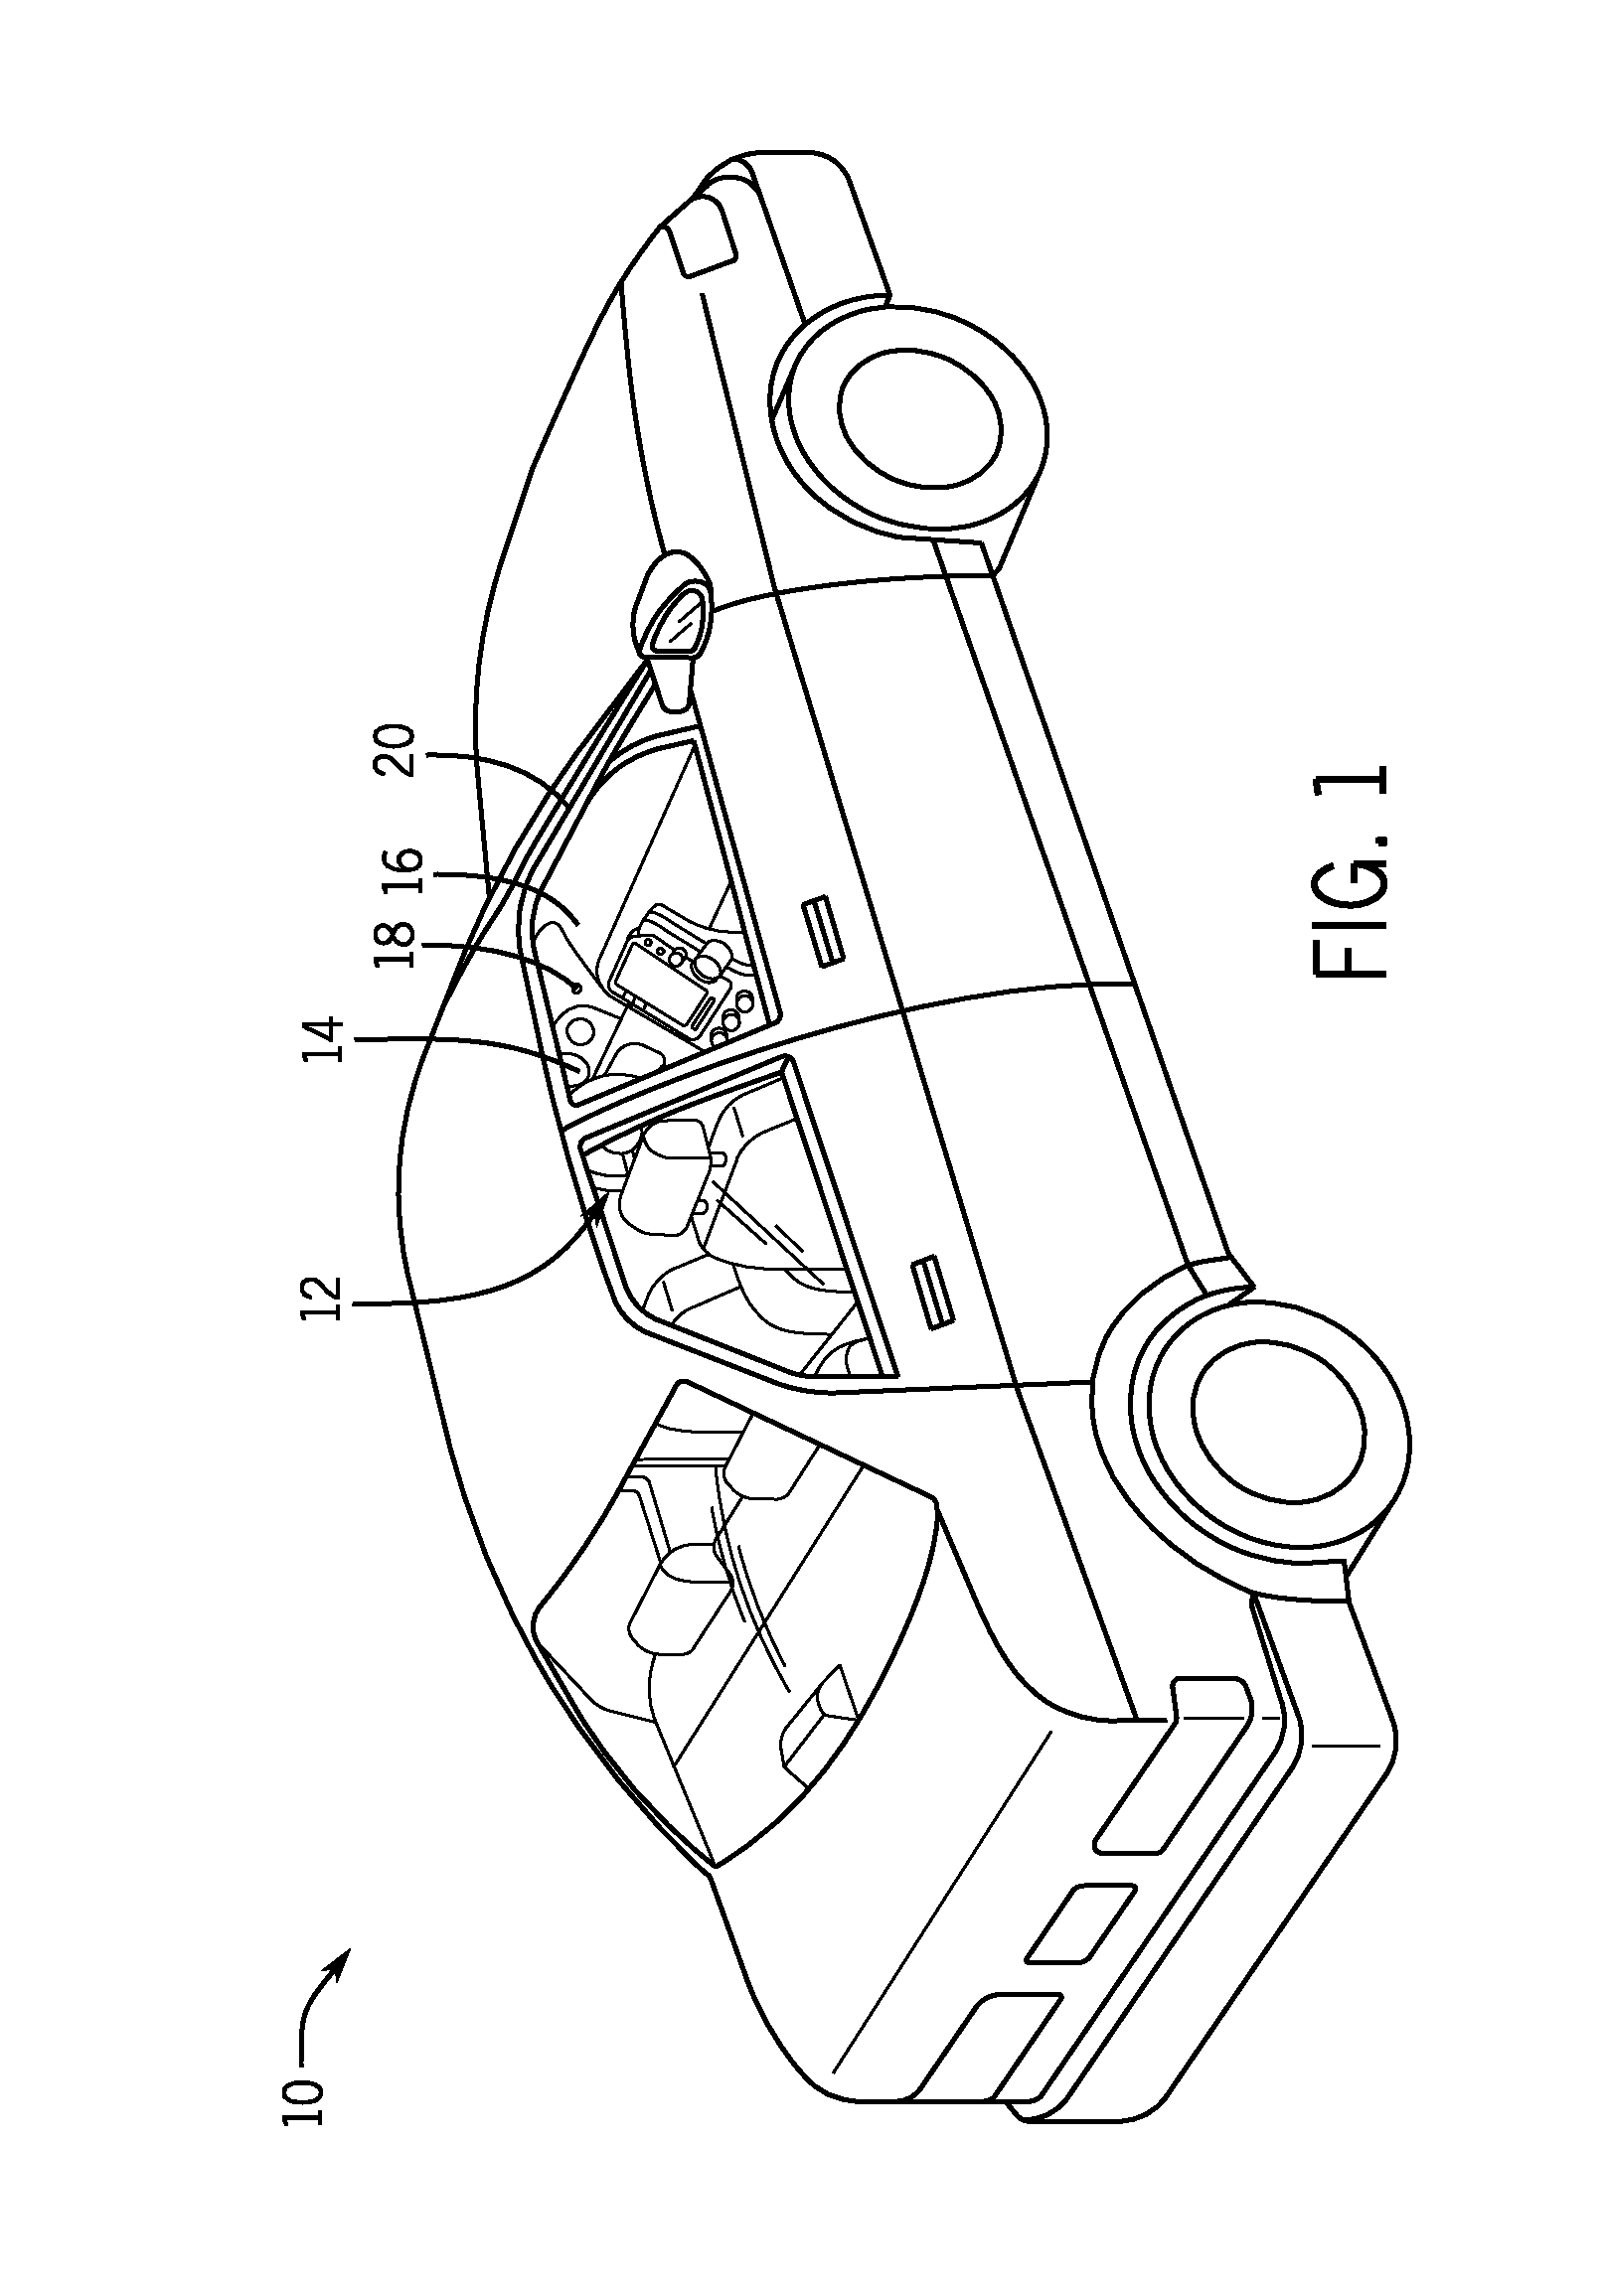 Systems and methods for displaying three-dimensional images on a vehicle instrument console